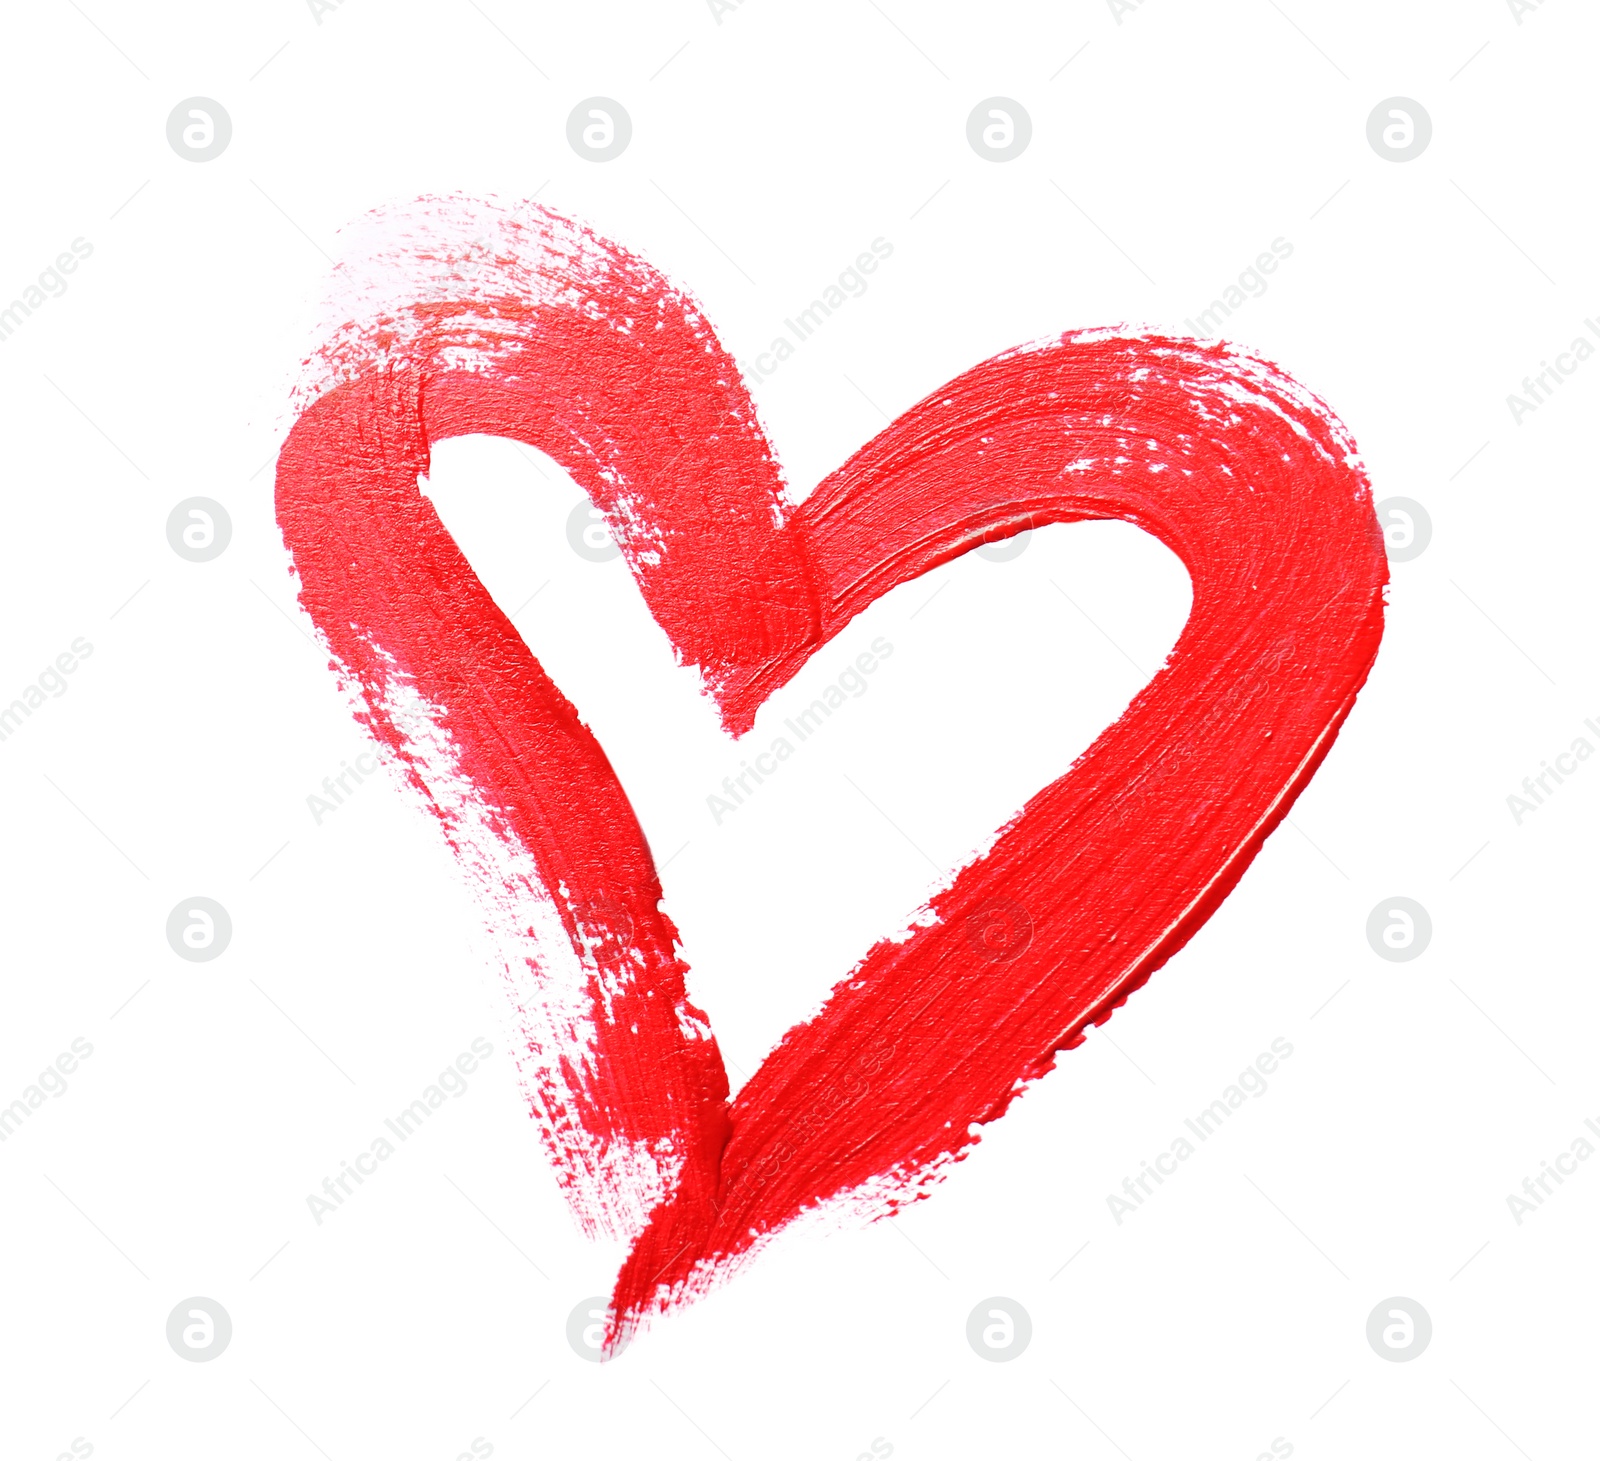 Photo of Red paint sample in shape of heart on white background, top view